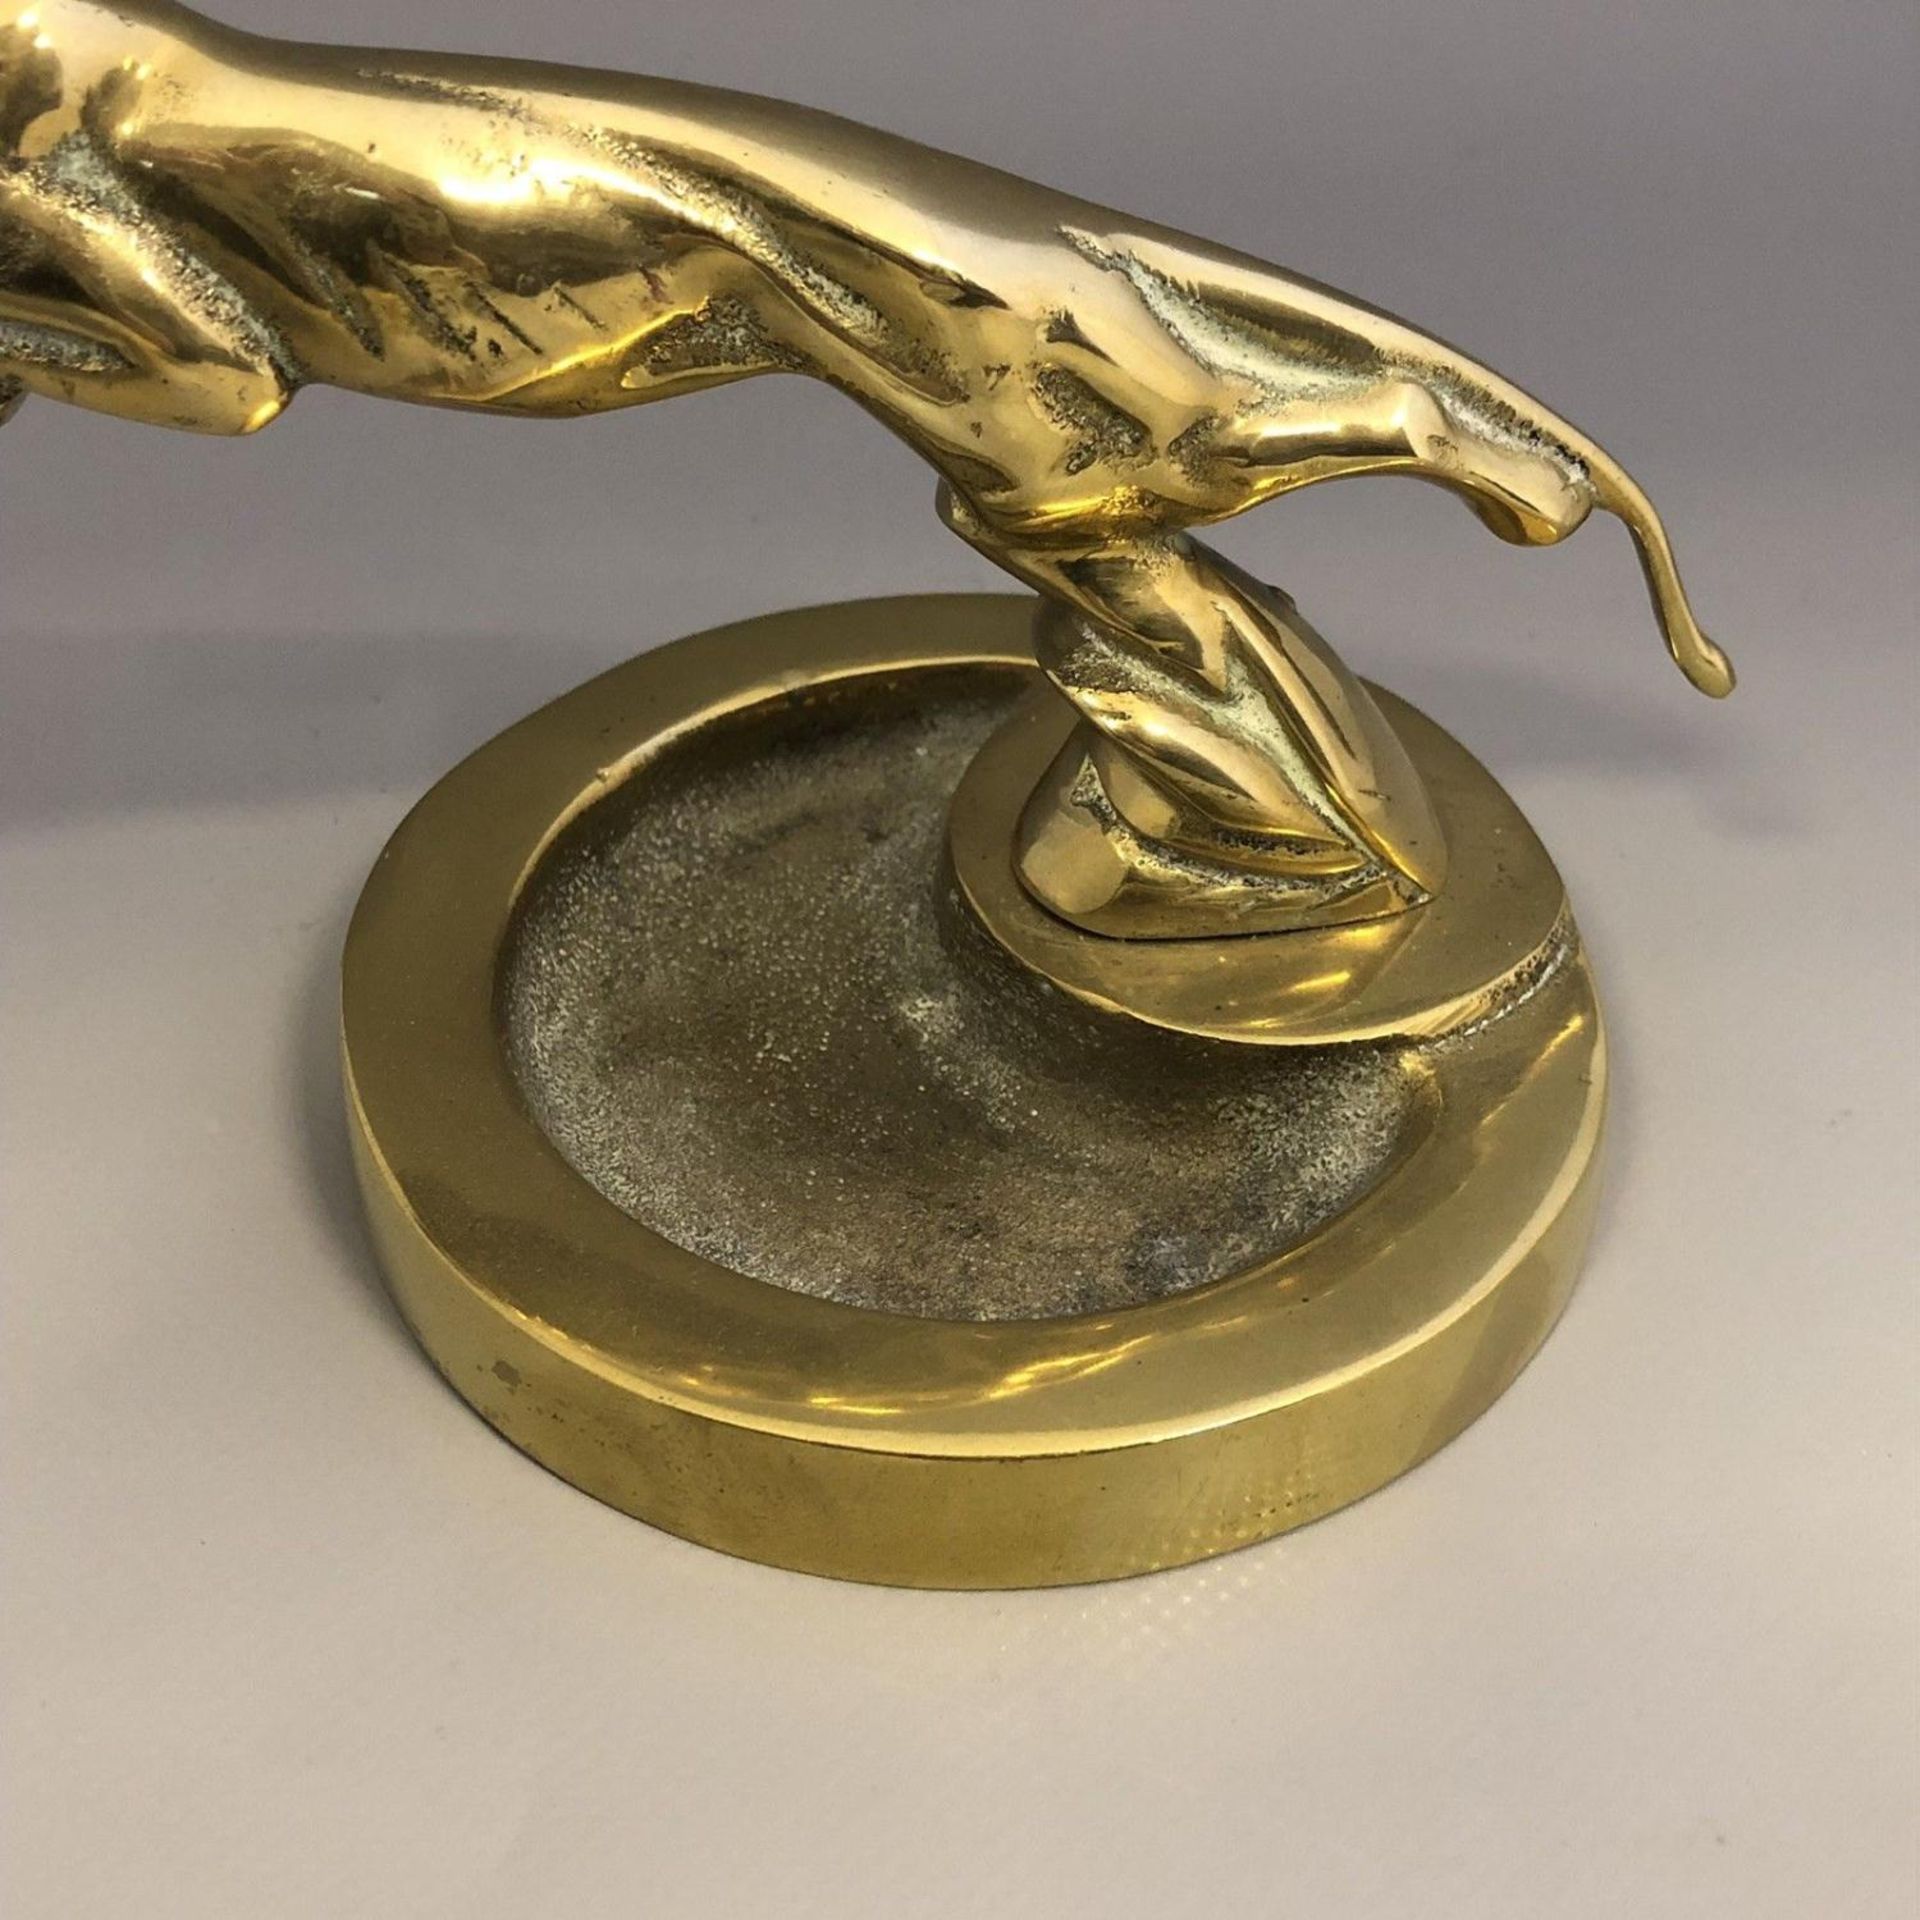 Vintage cast brass ashtray with leaping jaguar mount car mascot - Image 5 of 6